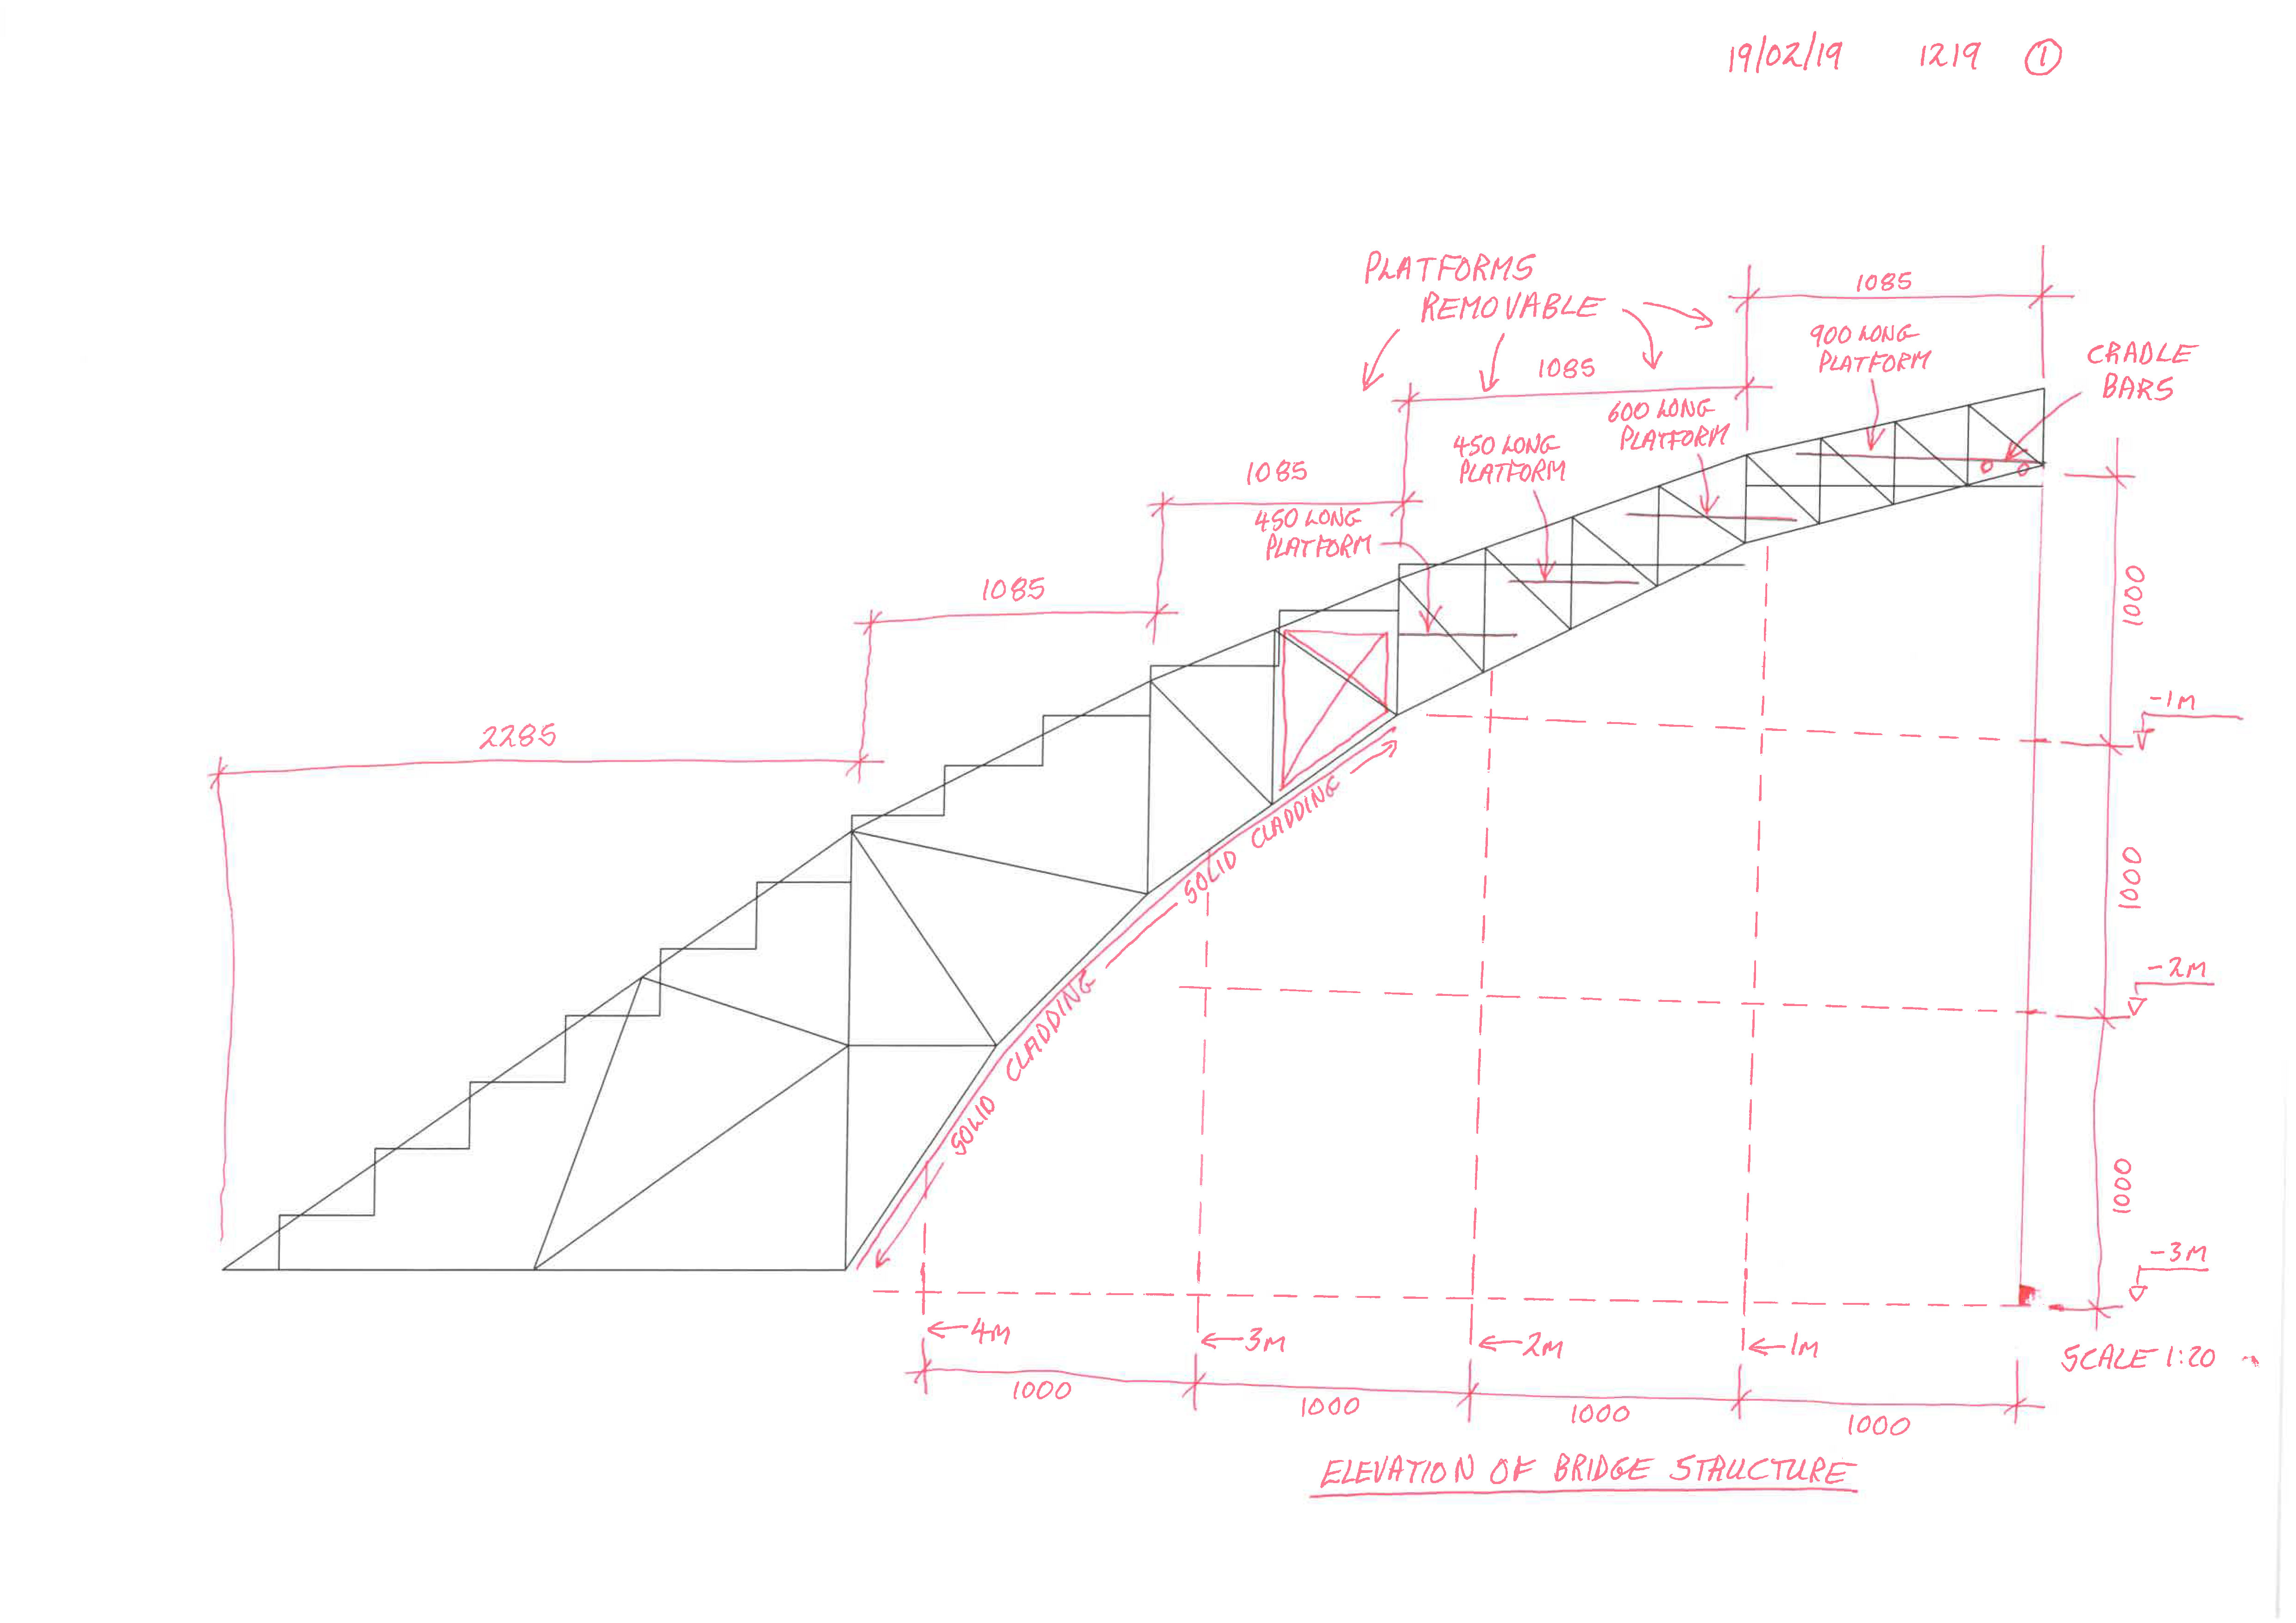 One of many working design sketches of Bridge. This is a pencil drawing showing one half of a bridge, with measurements to show scale.